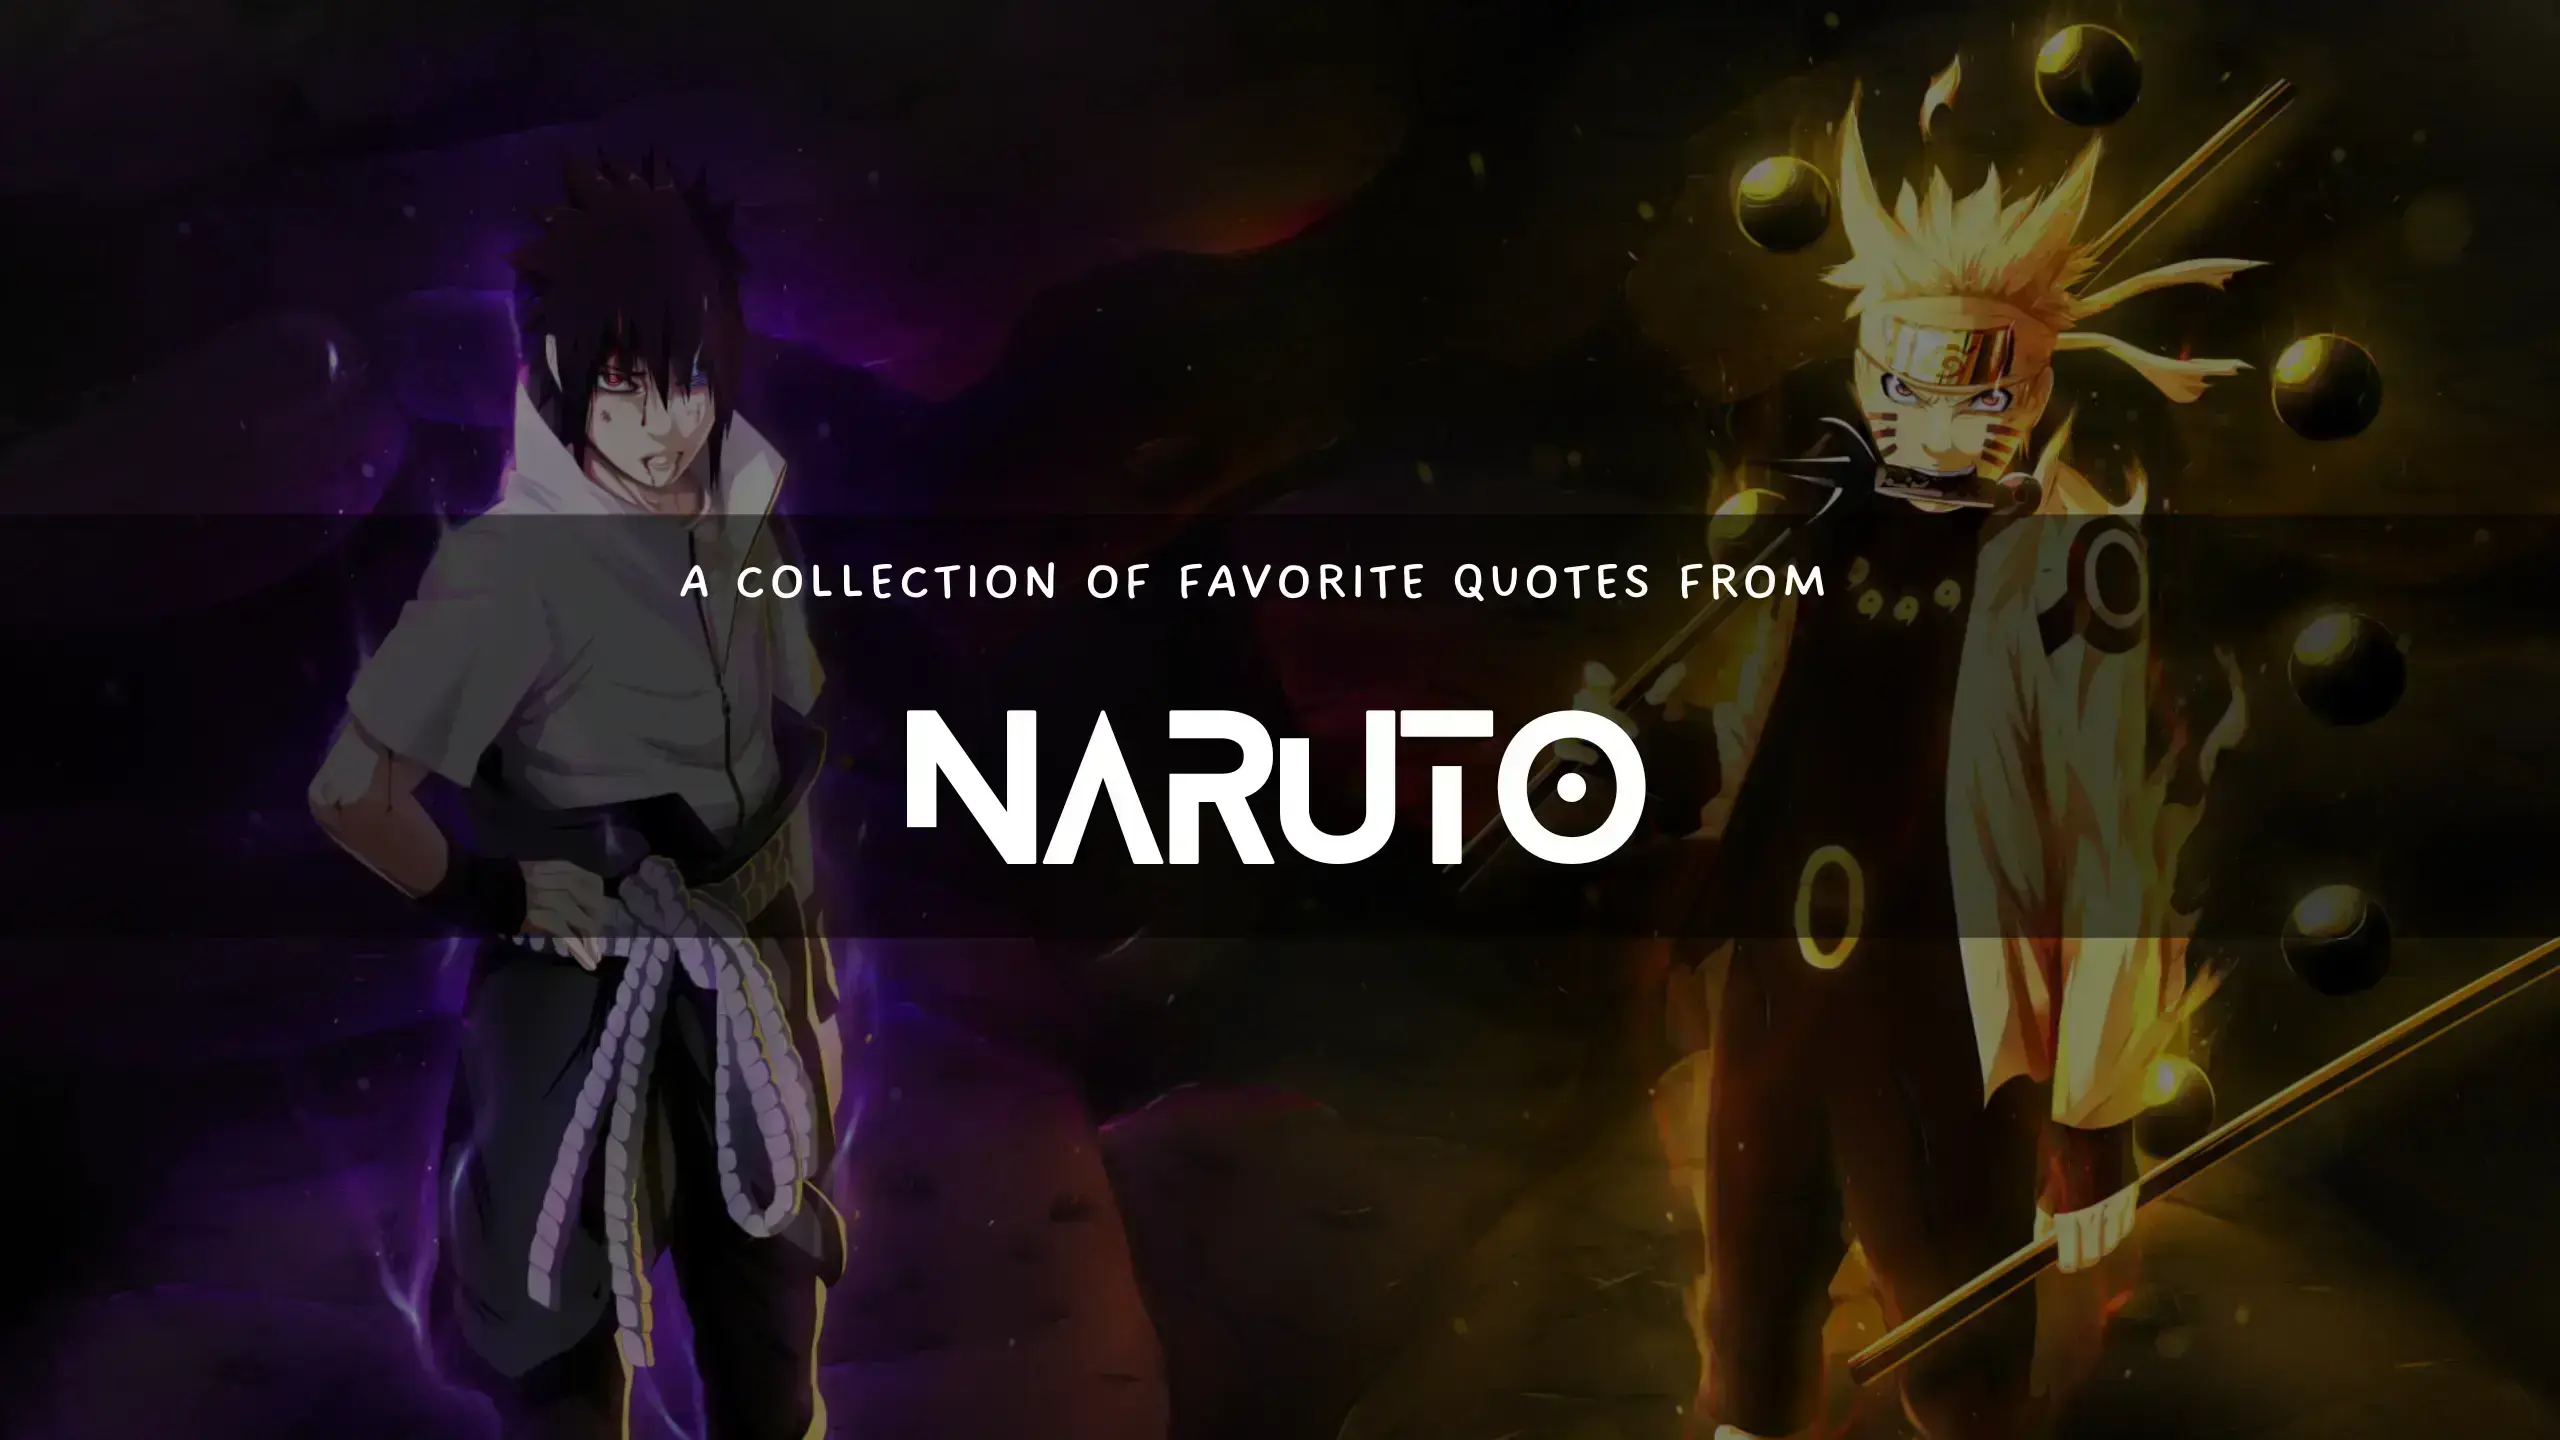 Awesome quotes from the Naruto Anime